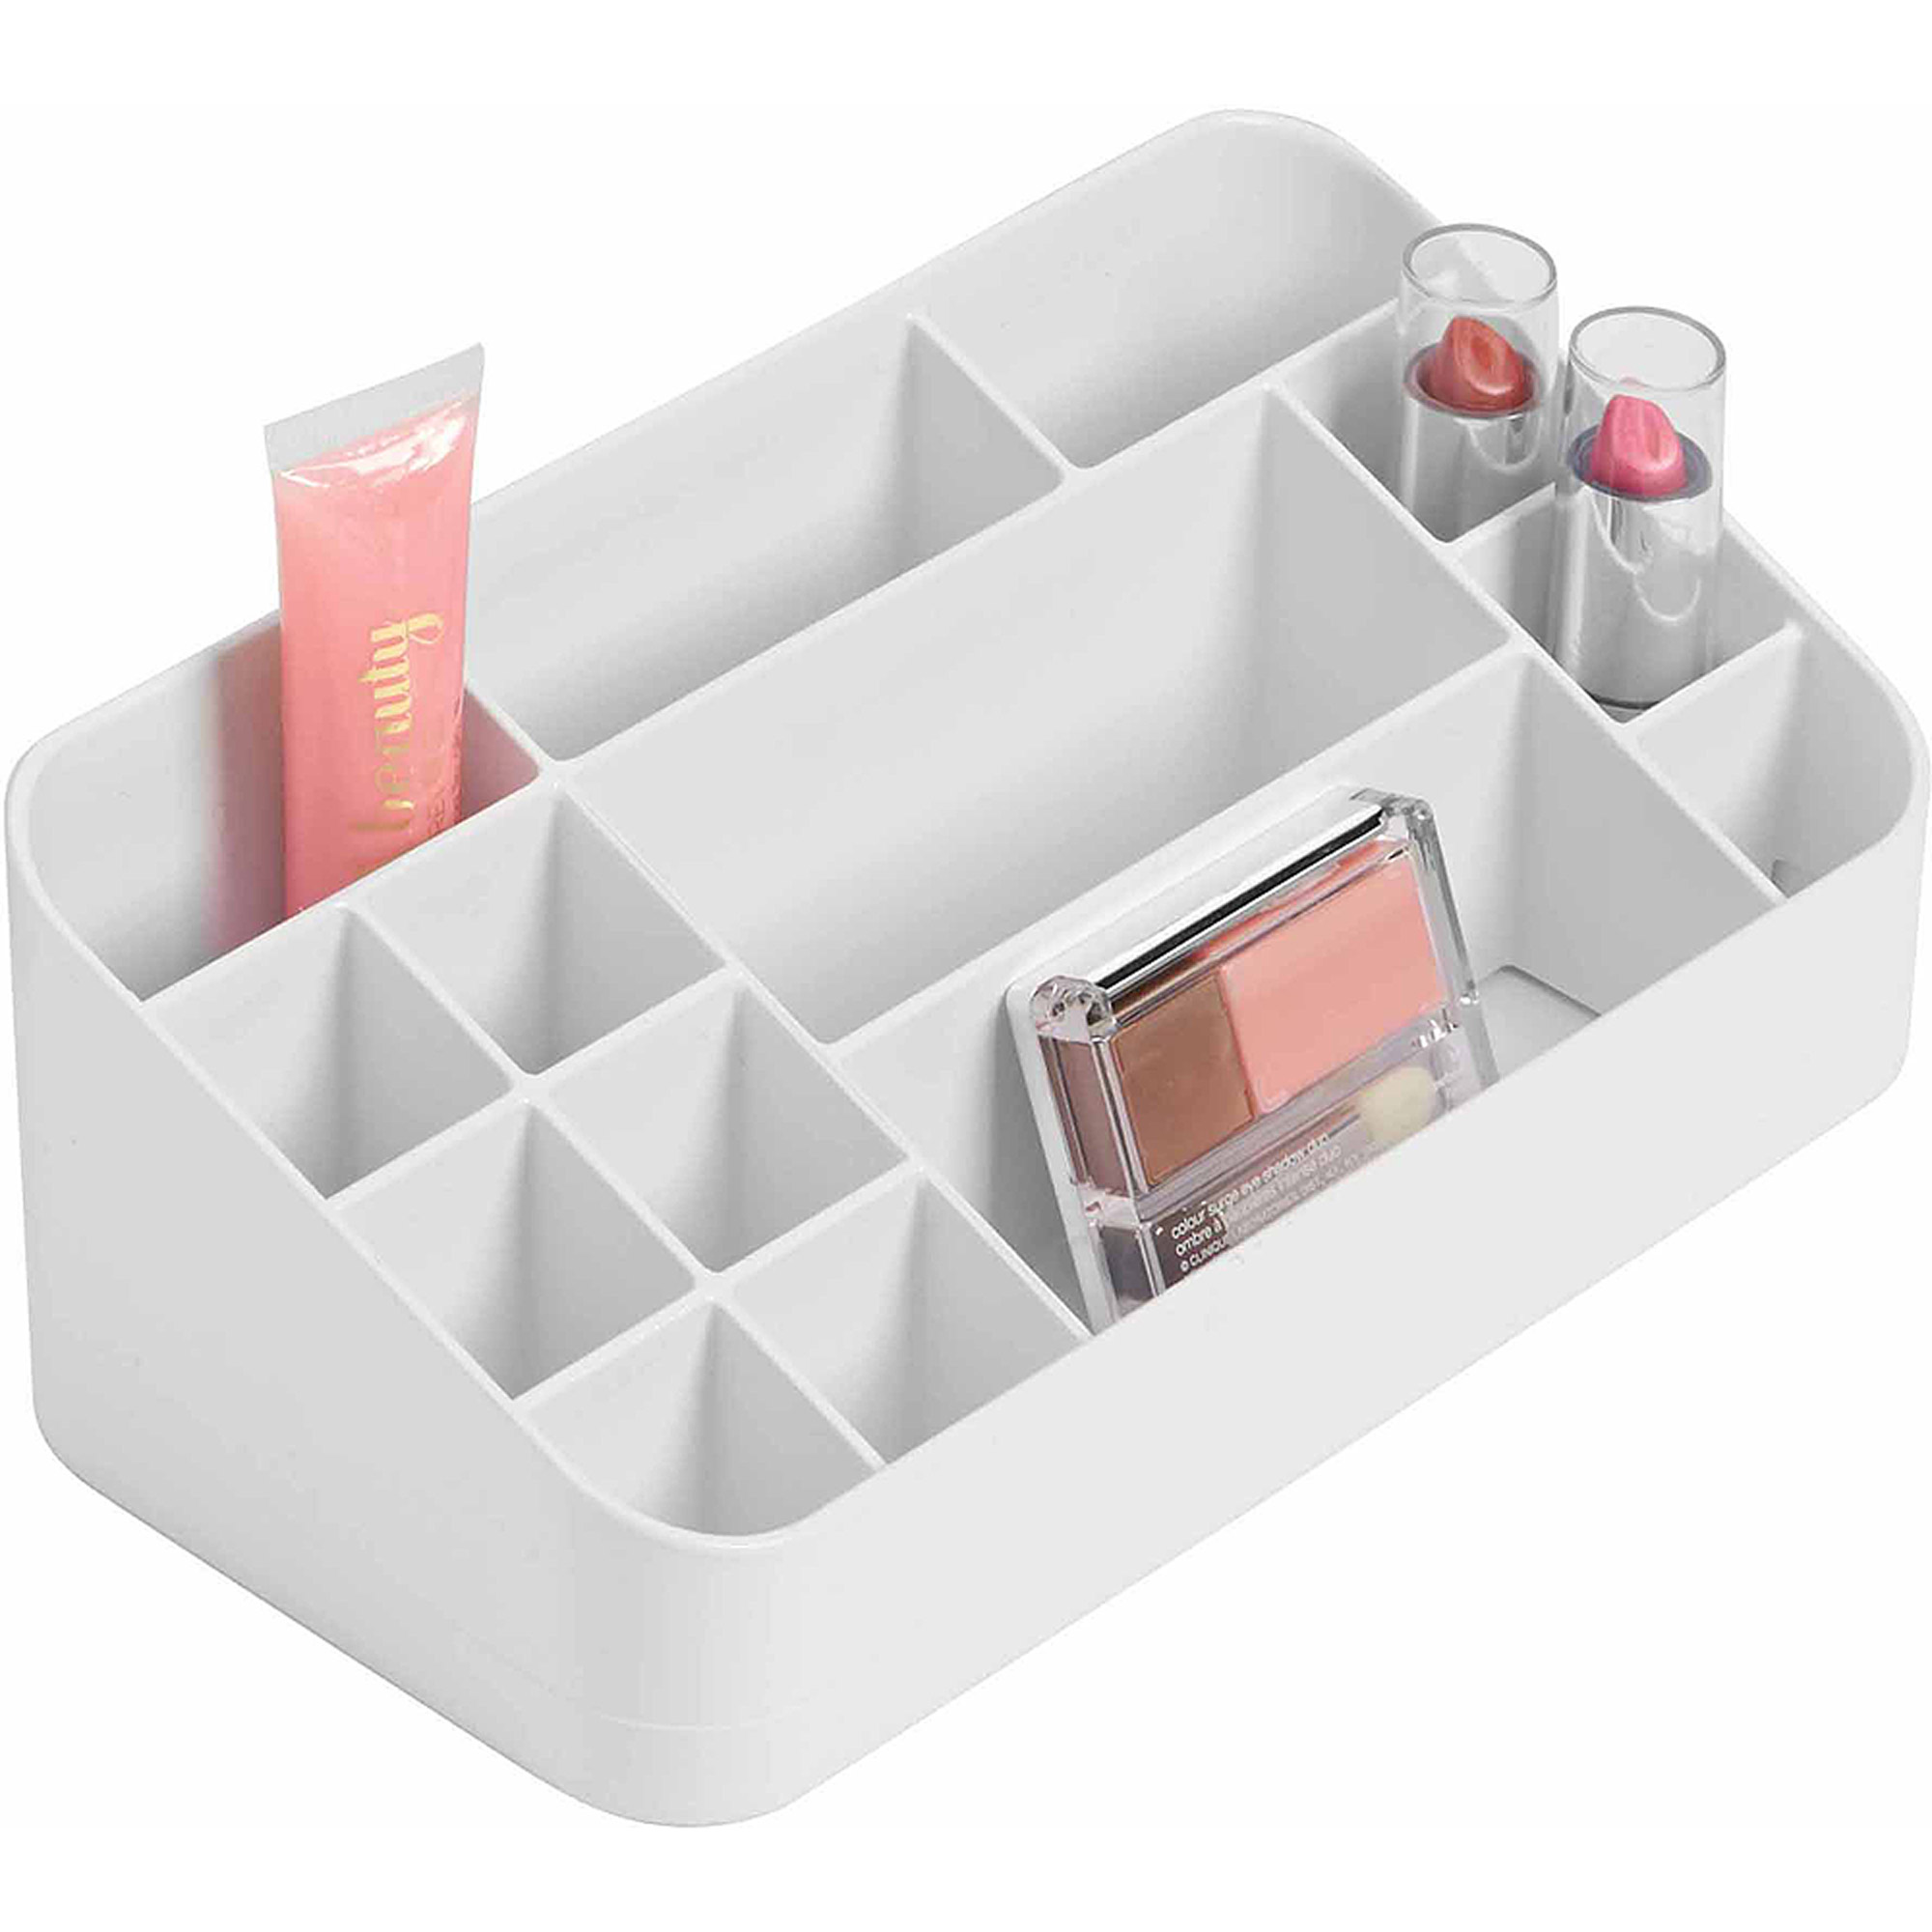 iDesign Clarity Cosmetic Organizer for Vanity Cabinet to Hold Makeup, Beauty Products, Lip Sticks, White - image 1 of 6